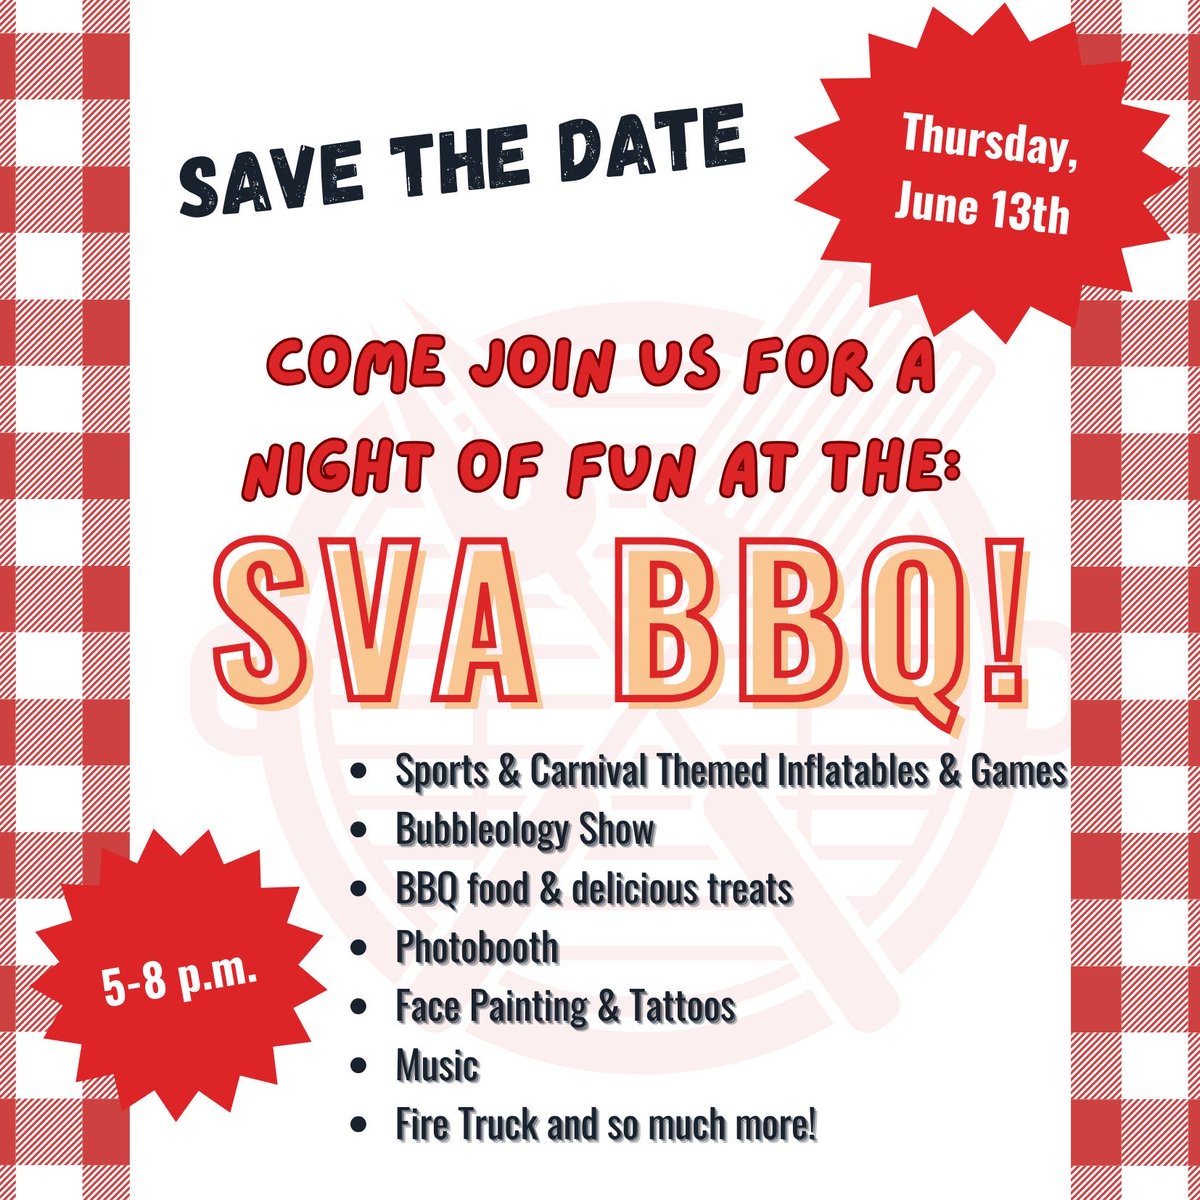 SVA BBQ is on Thursday June 13th! Save the date📝